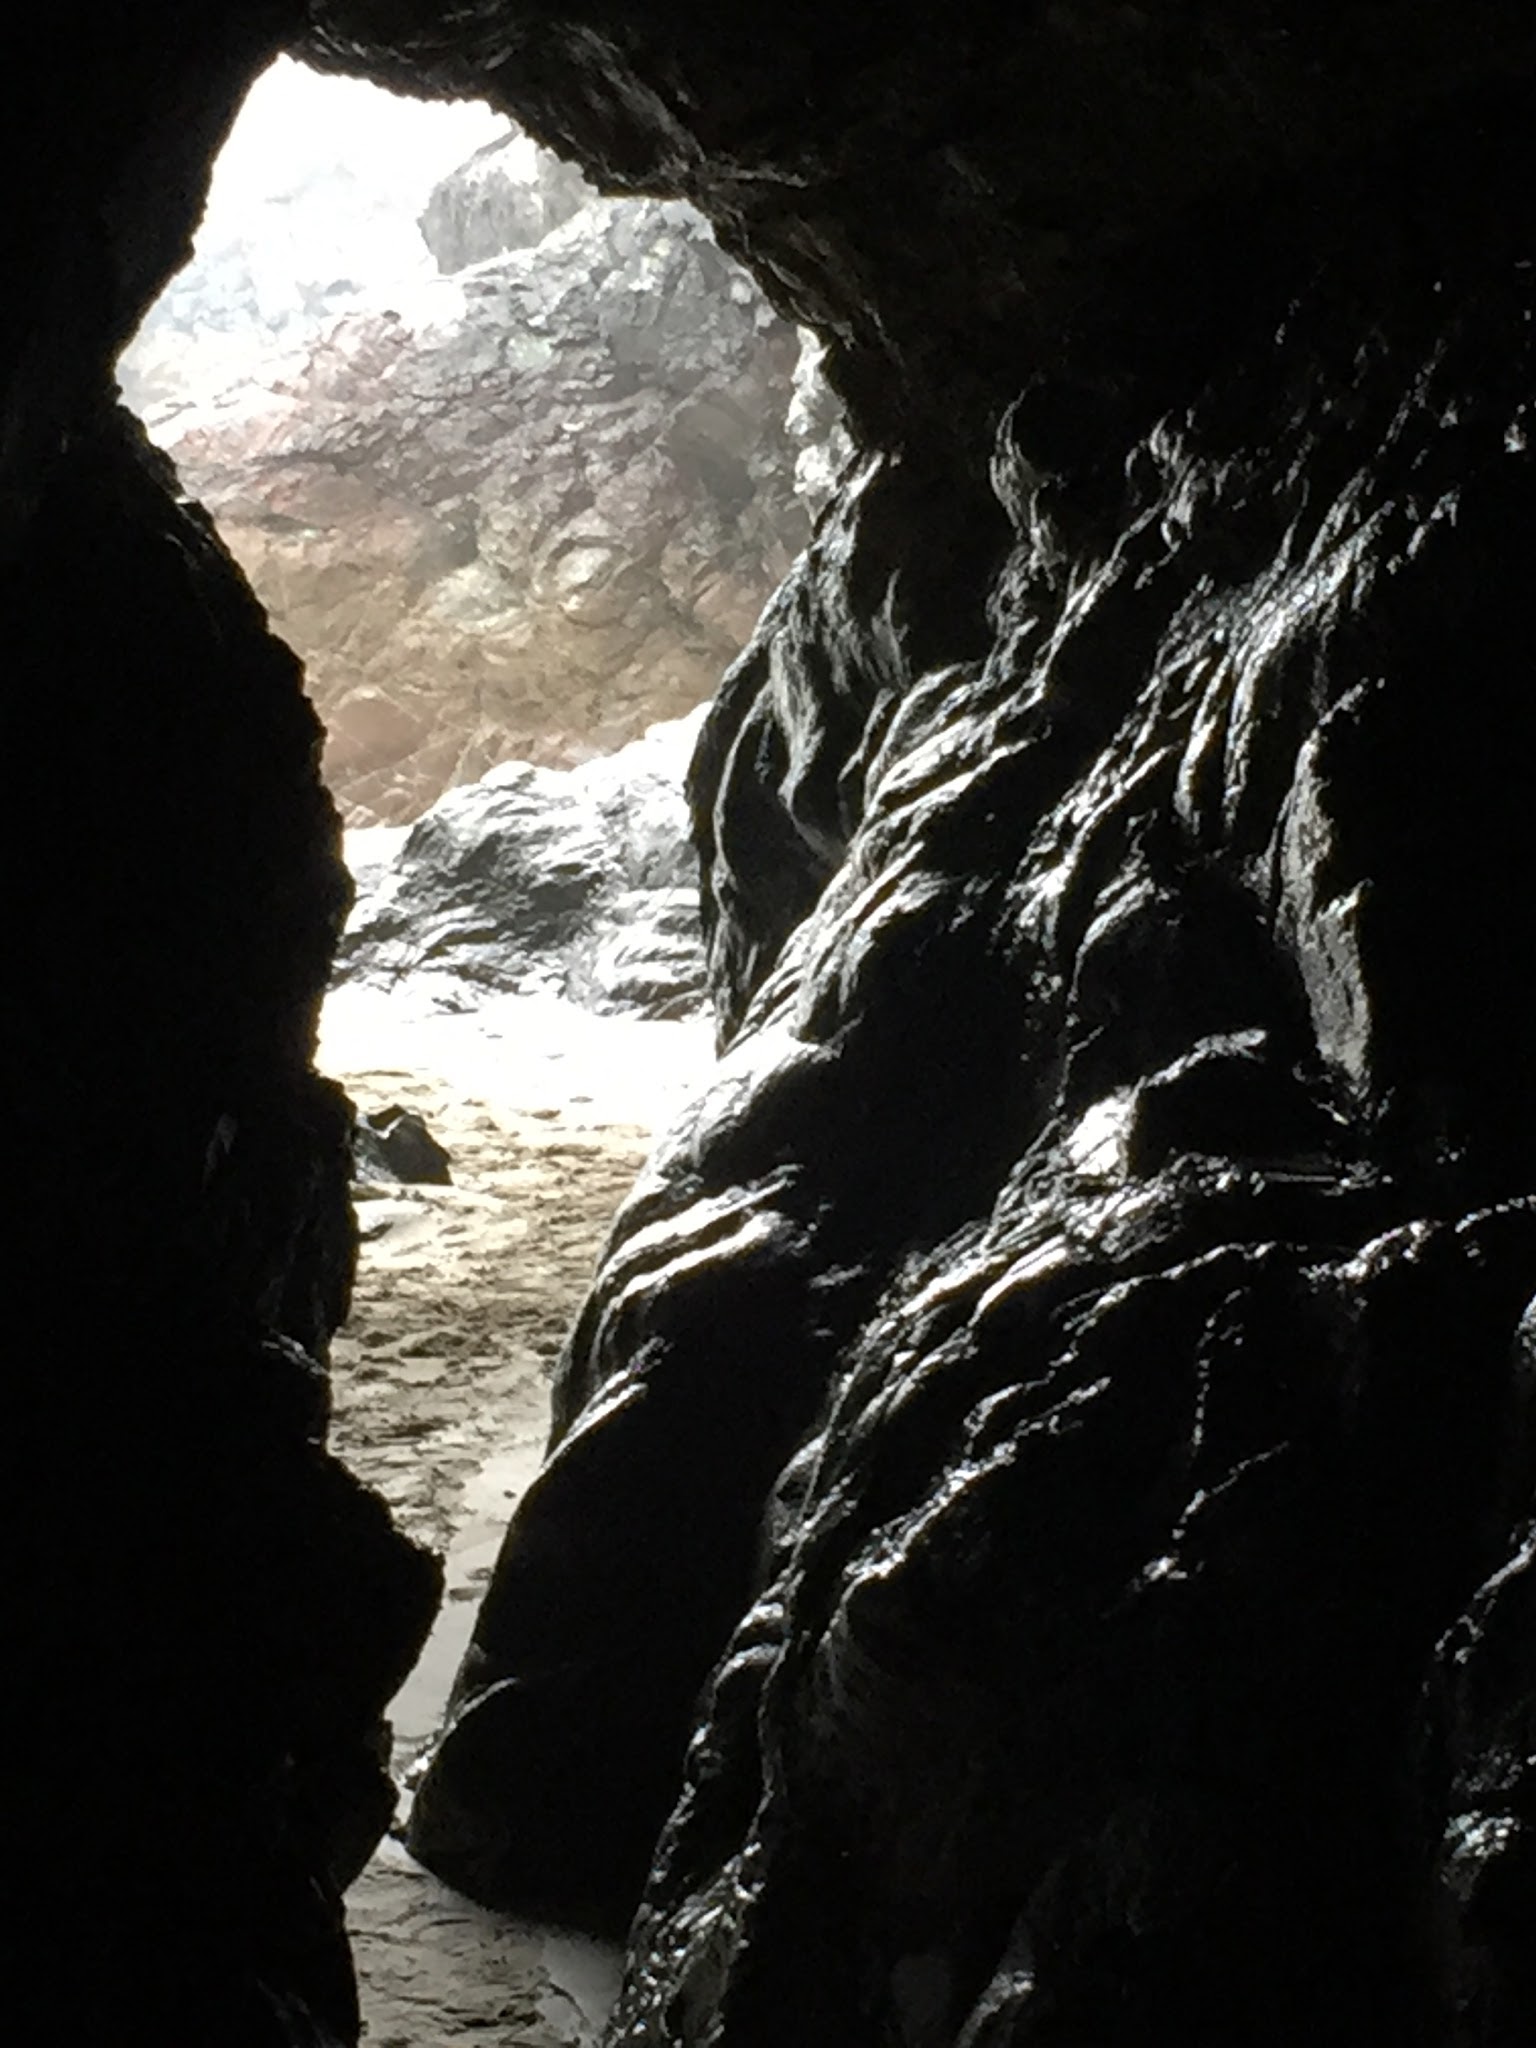 Interior of a cave at the Beautiful Kynance Cove, photos by modern bric a brac